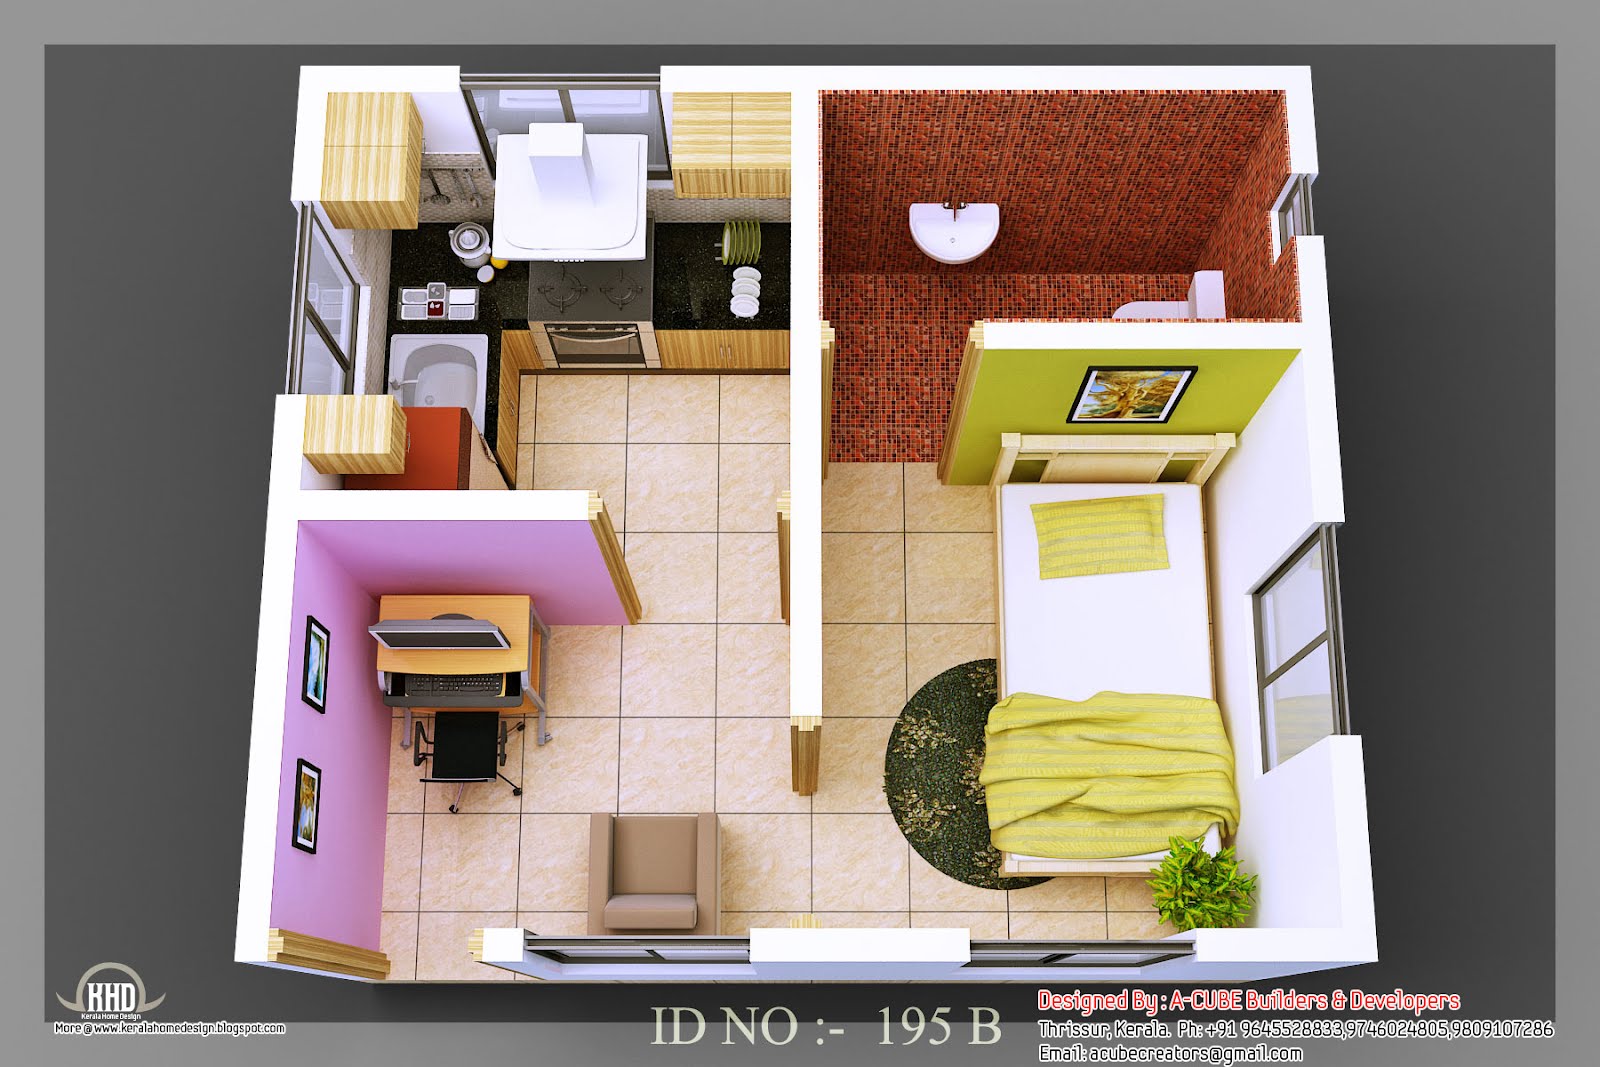 Kerala Home Dsgn: 3D isometric views of small house plans